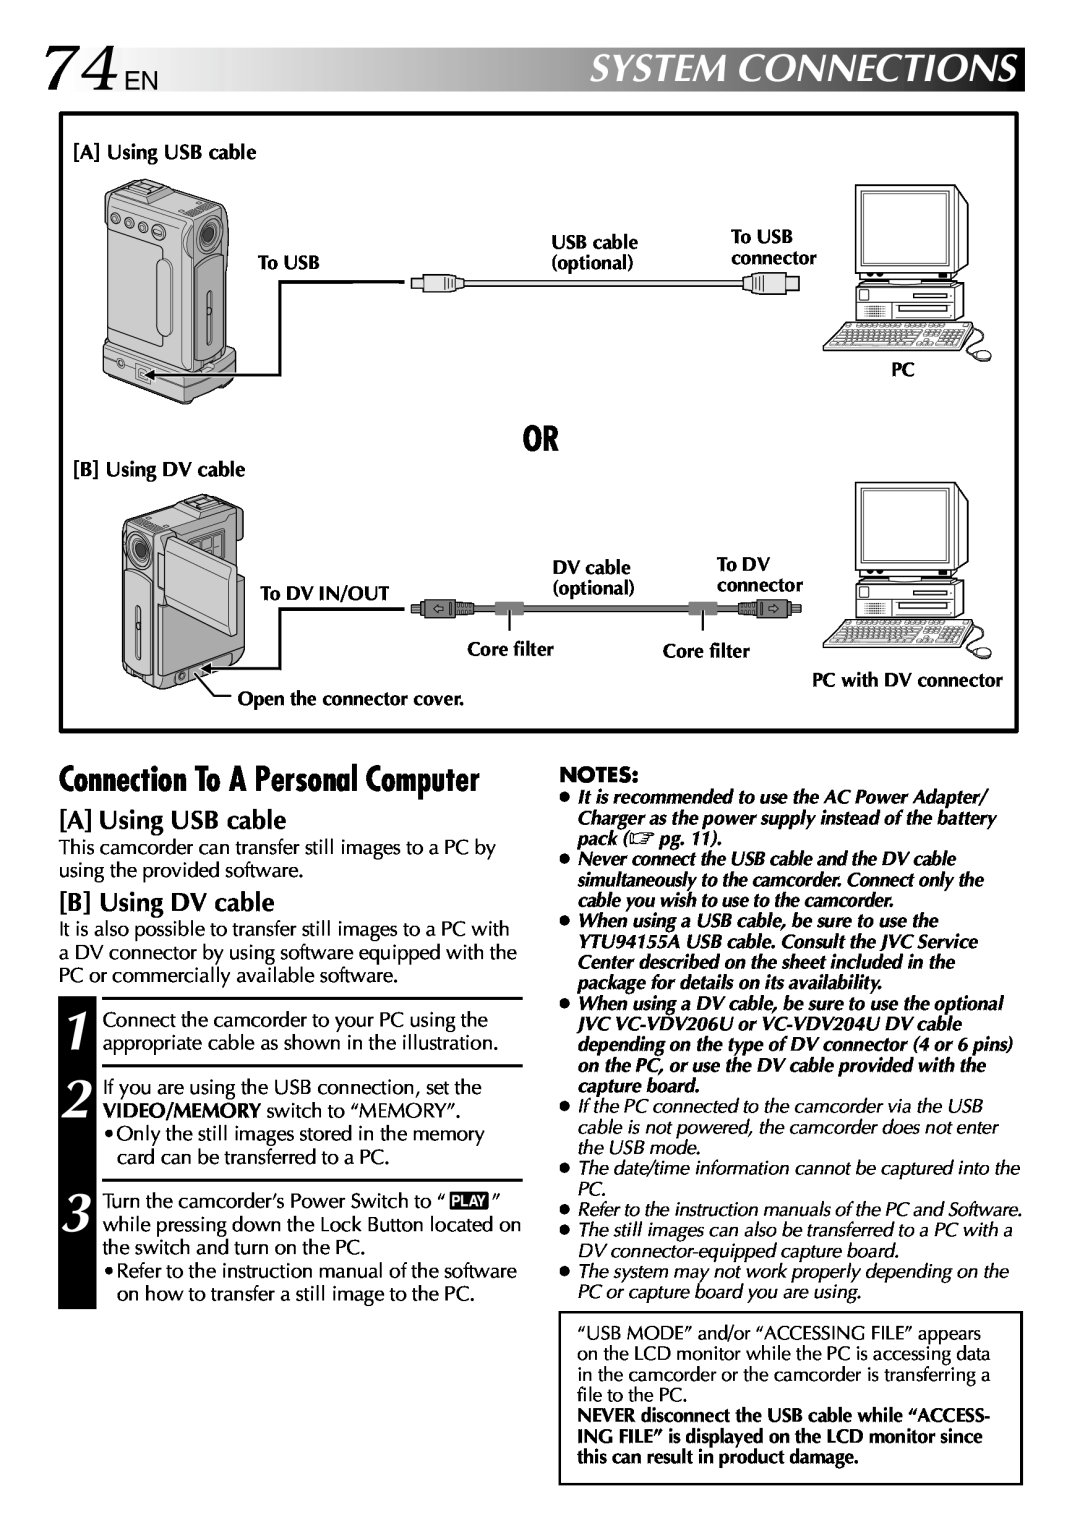 JVC GR-DVP3 74 EN, System Connections, Connection To A Personal Computer, A Using USB cable, B Using DV cable 